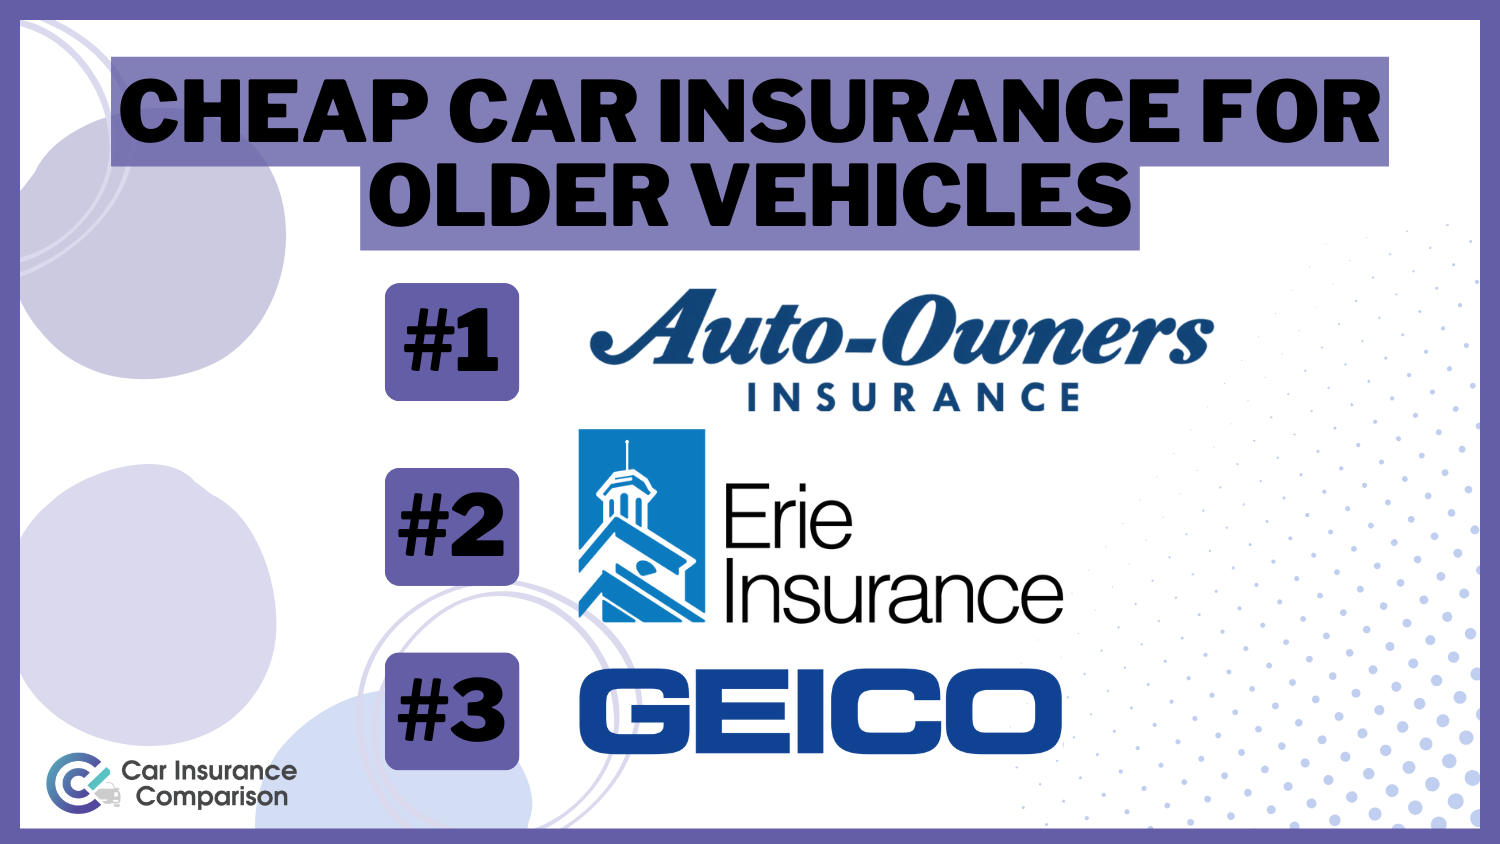 Cheap Car Insurance for Older Vehicles - Auto-Owners, Erie, Geico